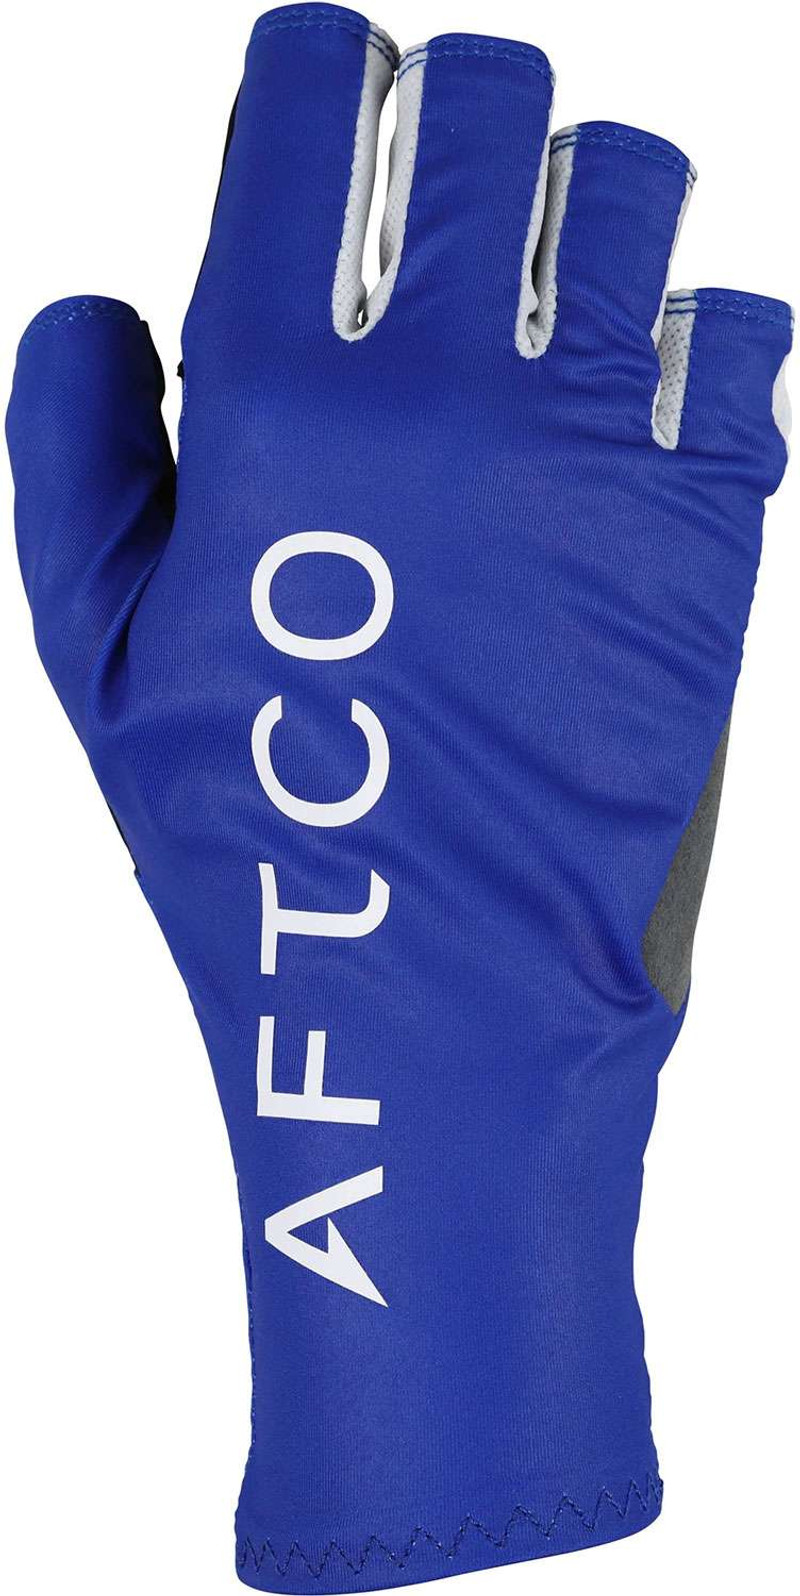 Aftco SolPro Gloves - TackleDirect